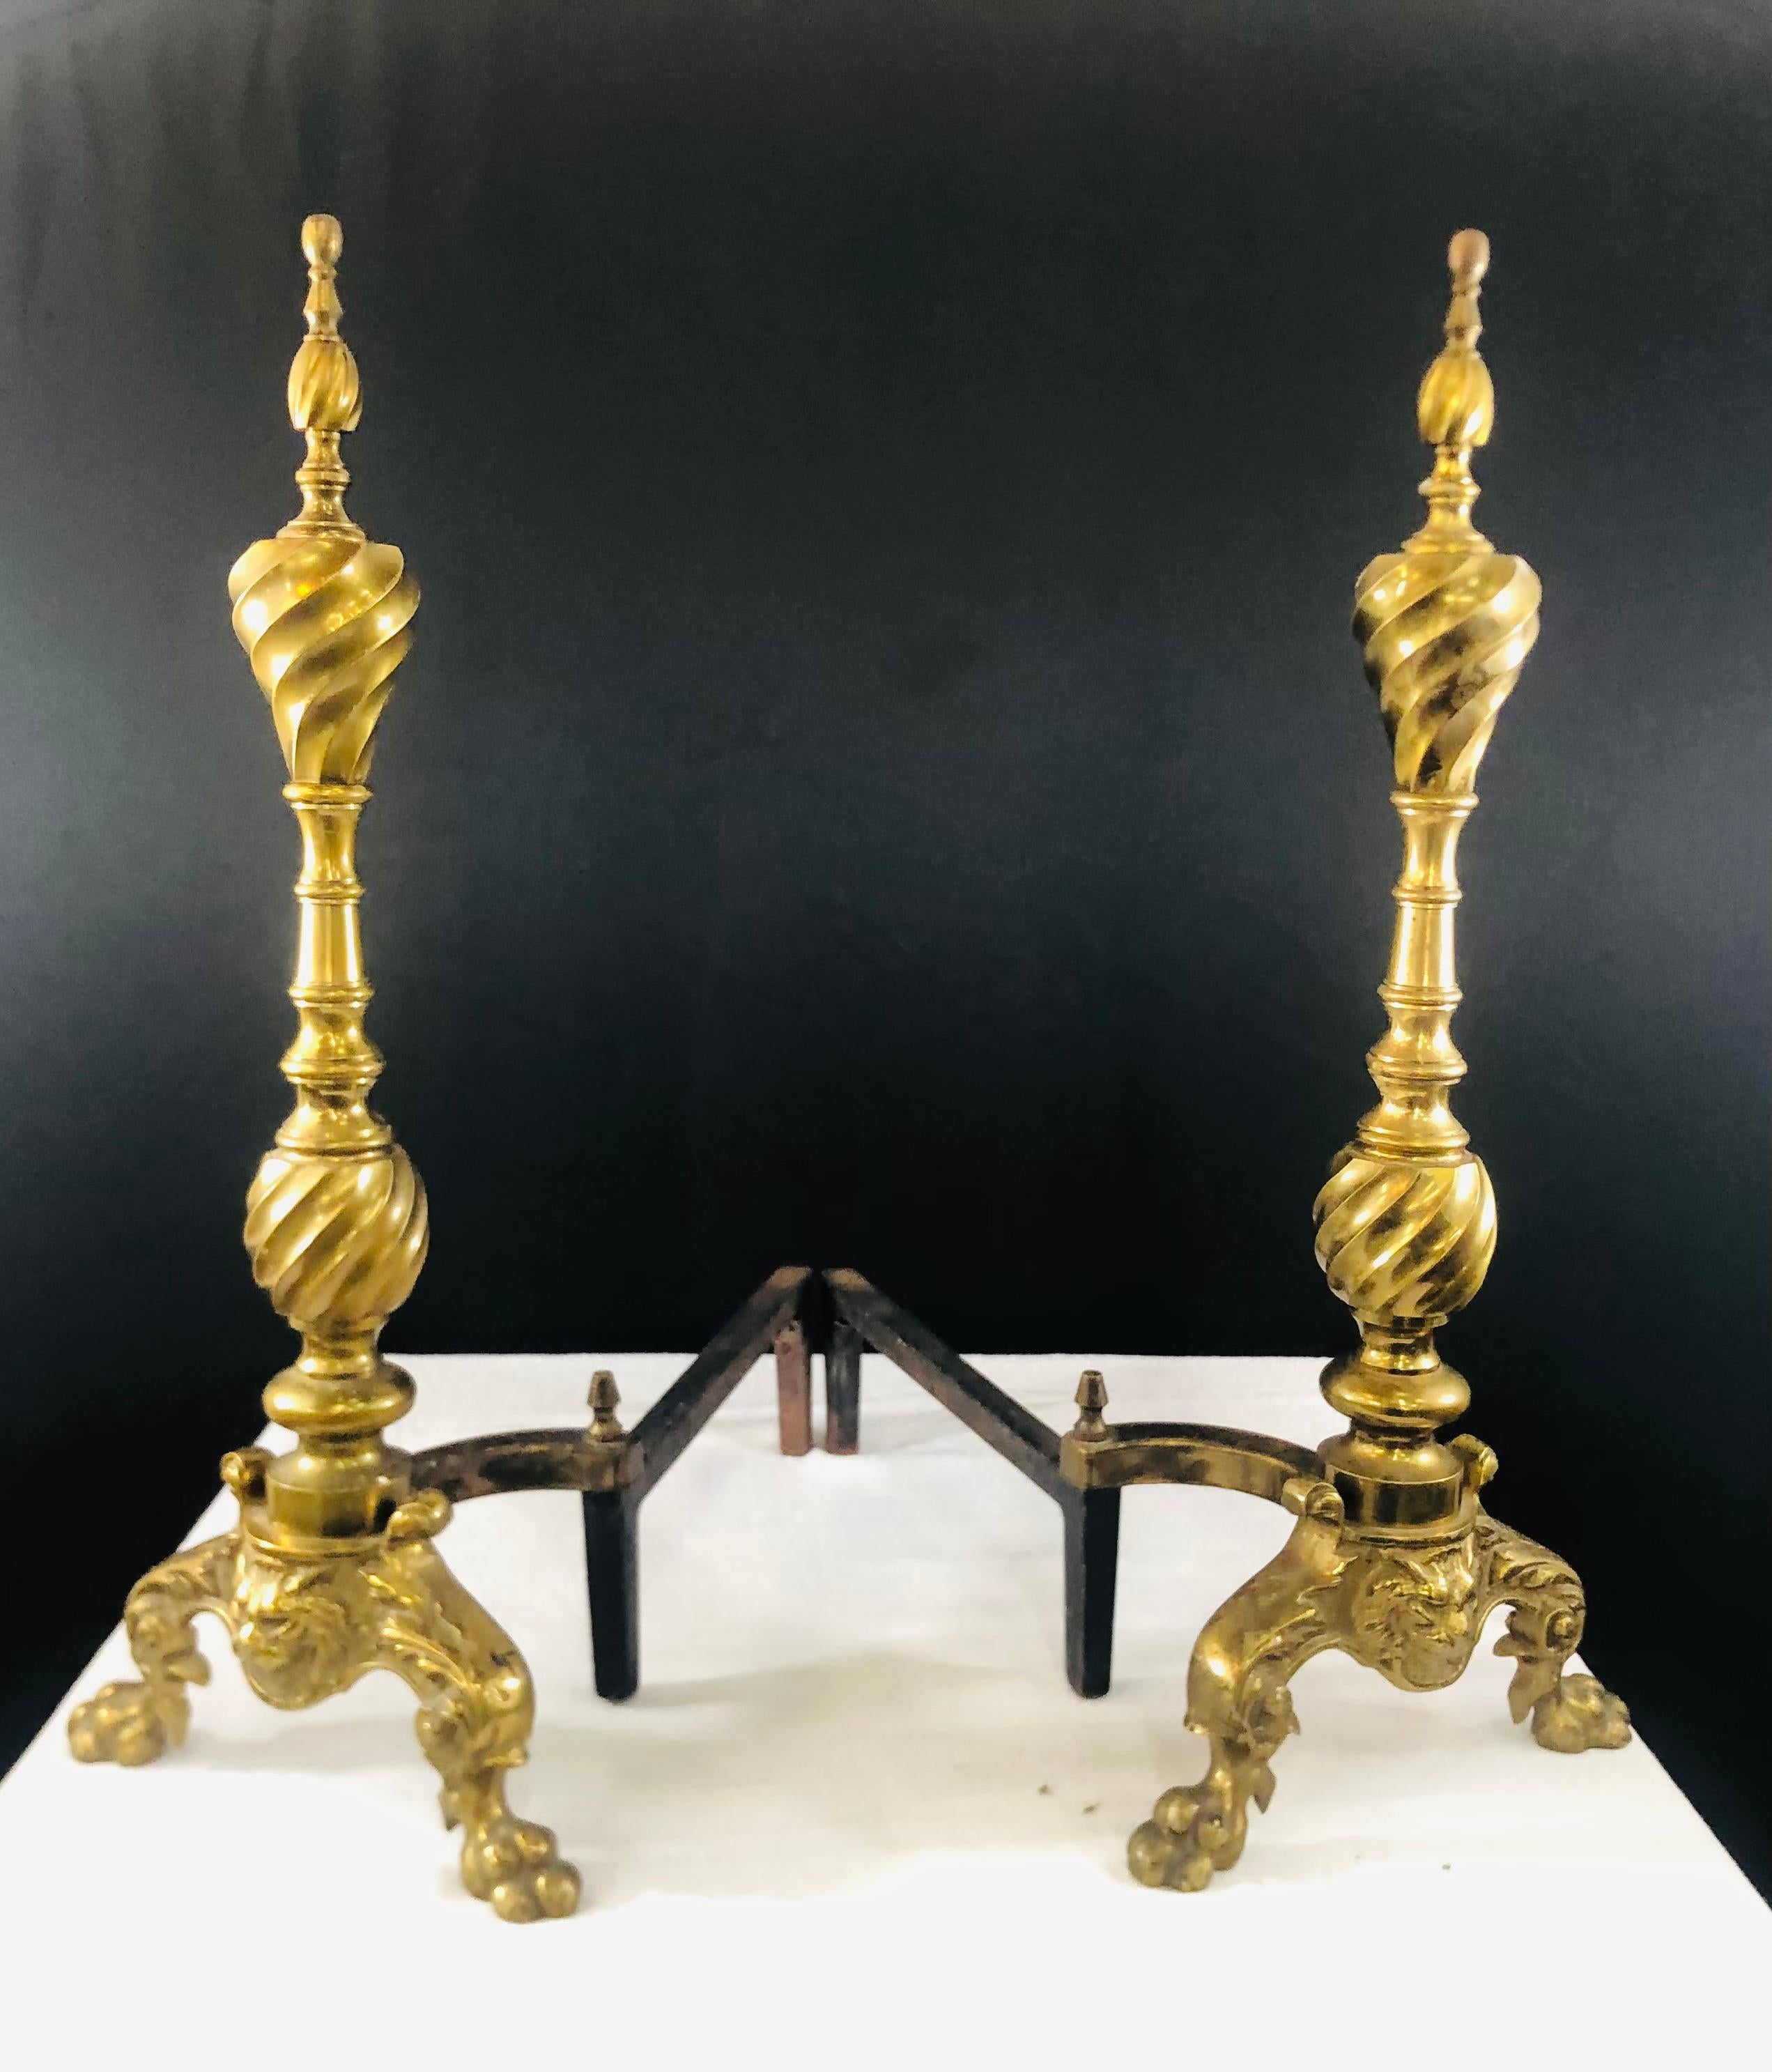 A classy pair of brass English andirons. Each andiron sets on paw shaped feet and features elegant carving brass twisted design on the columns. The andiron is almost 2 feet high and will add style and sophistication living room and make your